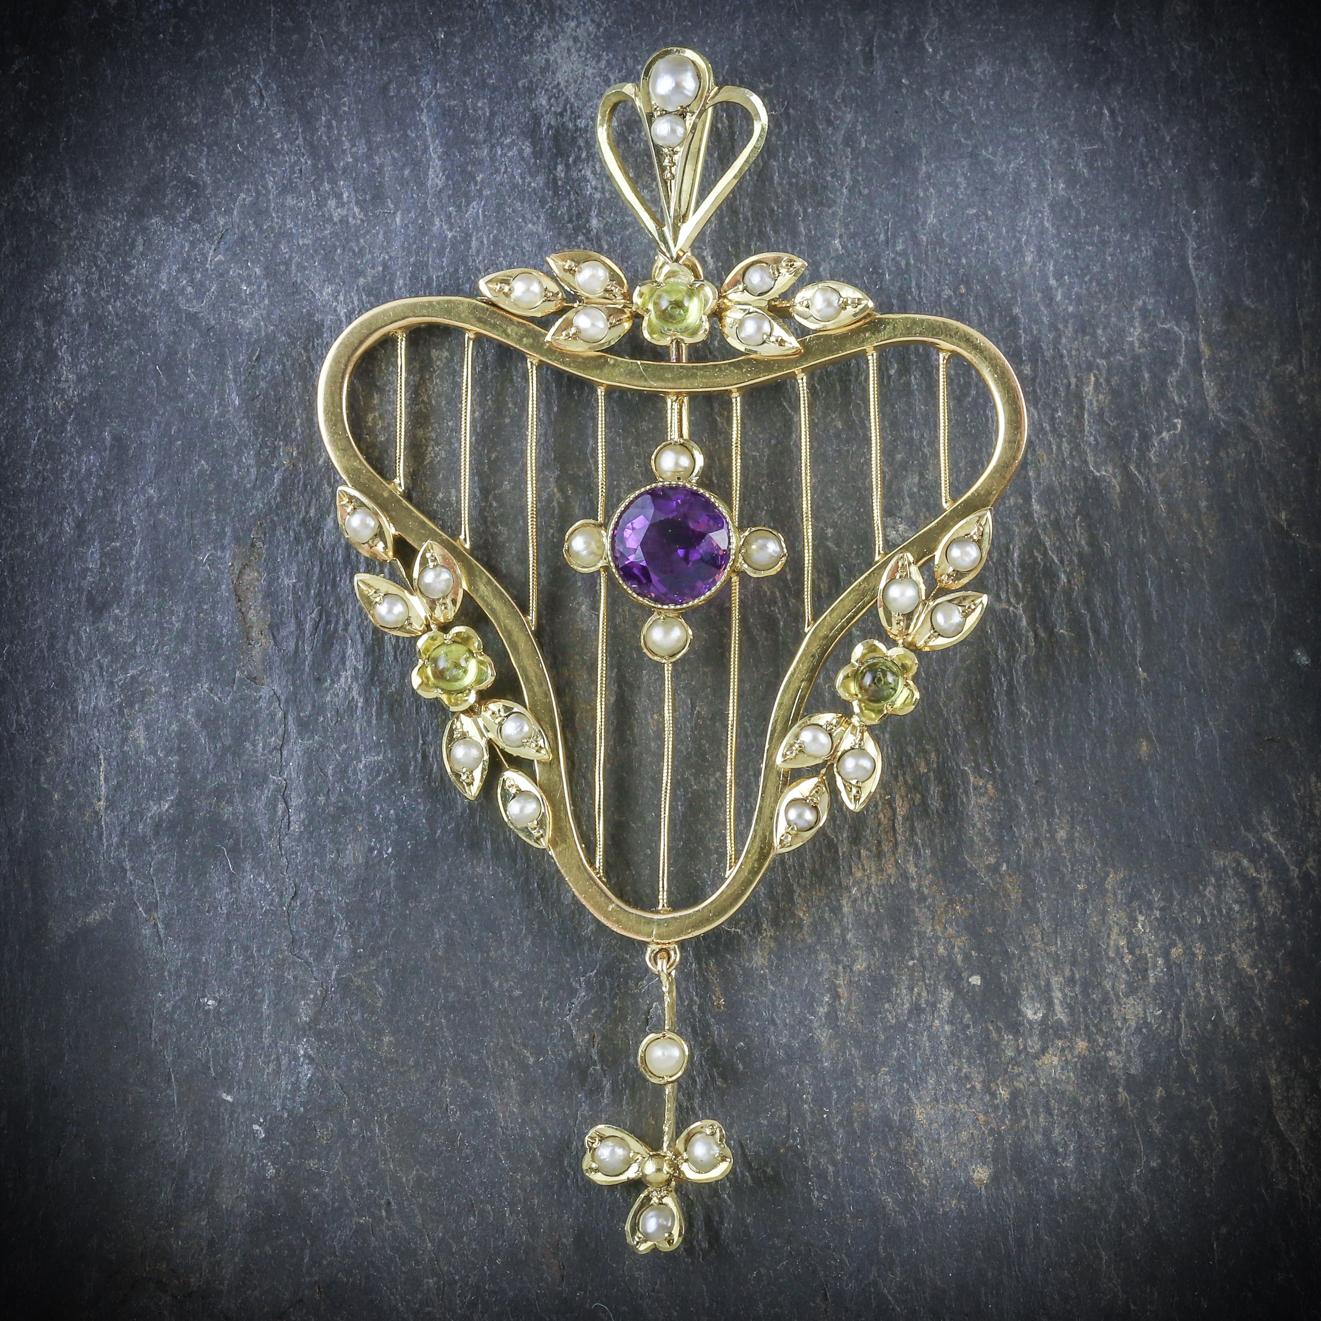 A stylish antique Victorian Suffragette pendant set in 9ct Yellow Gold and adorned with green Peridots, creamy Pearls and a violet Amethyst in the centre

The piece is beautifully made with a unique fret work that's decorated with floral motifs and